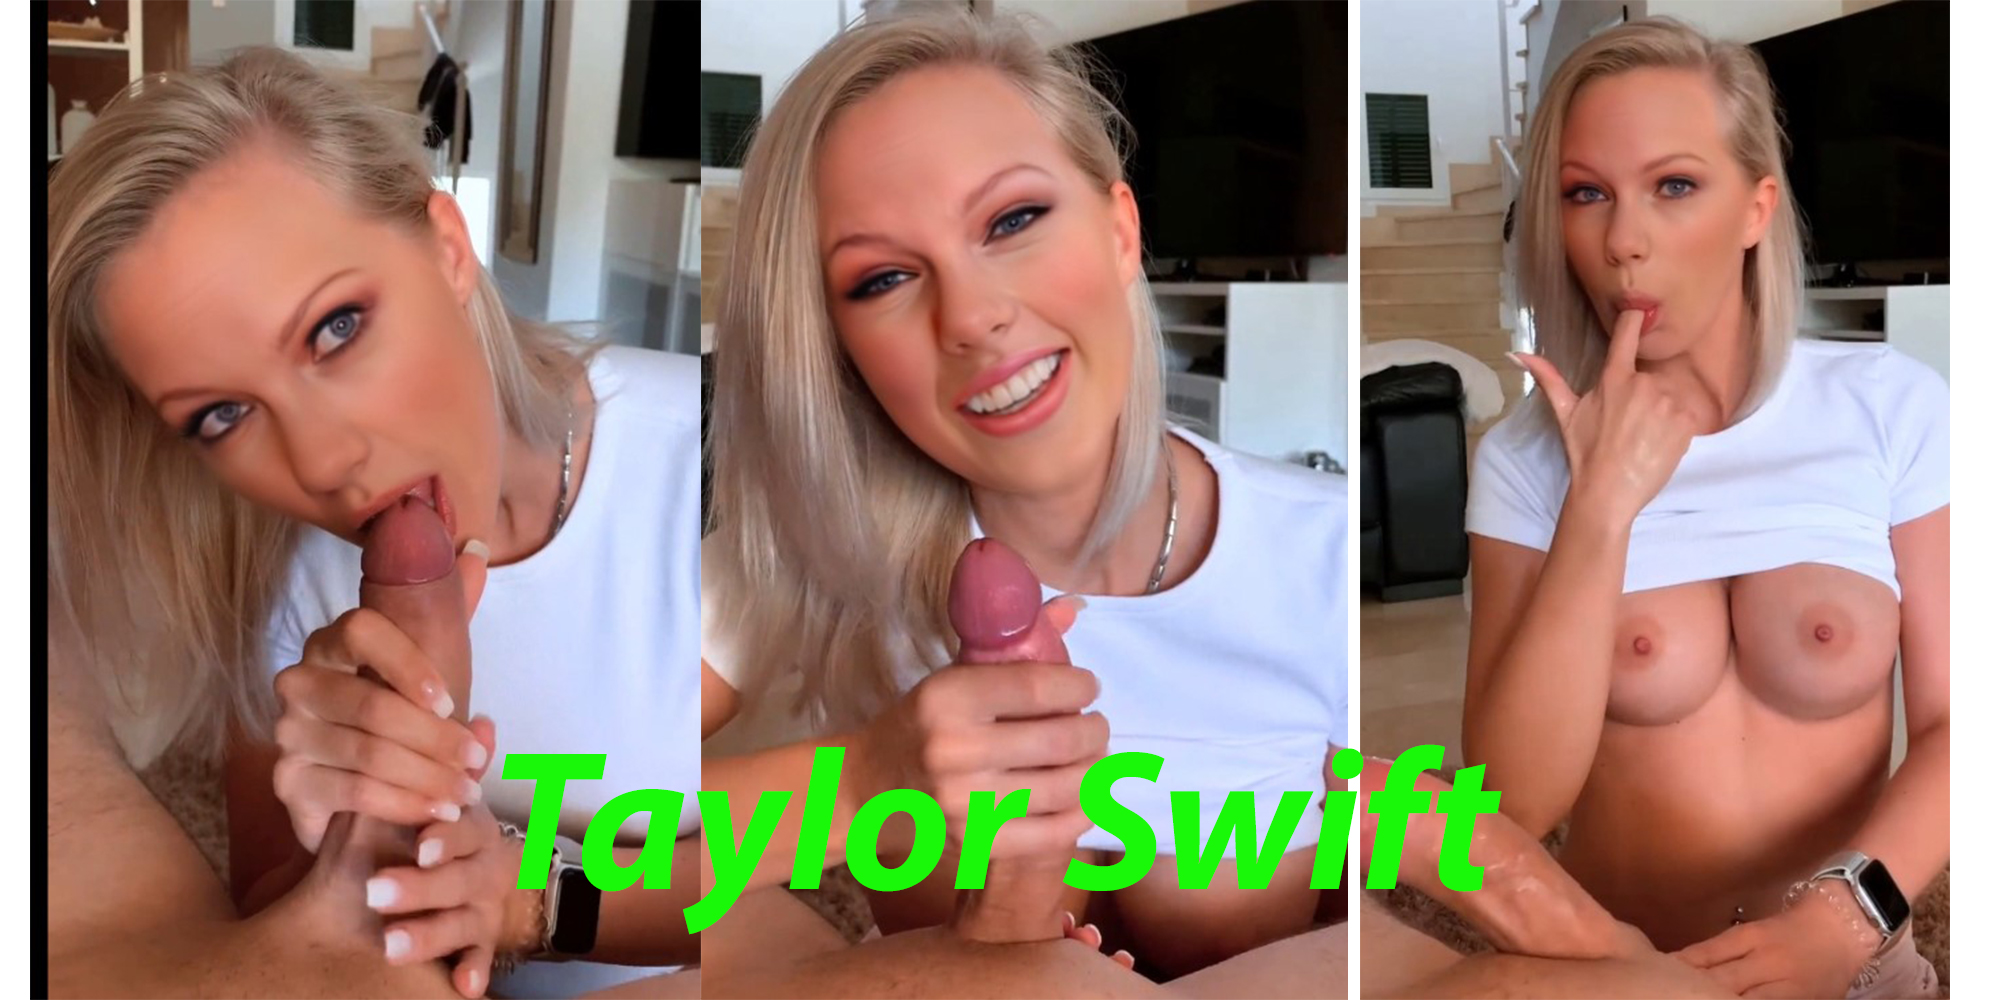 Taylor Swift takes care of your cock